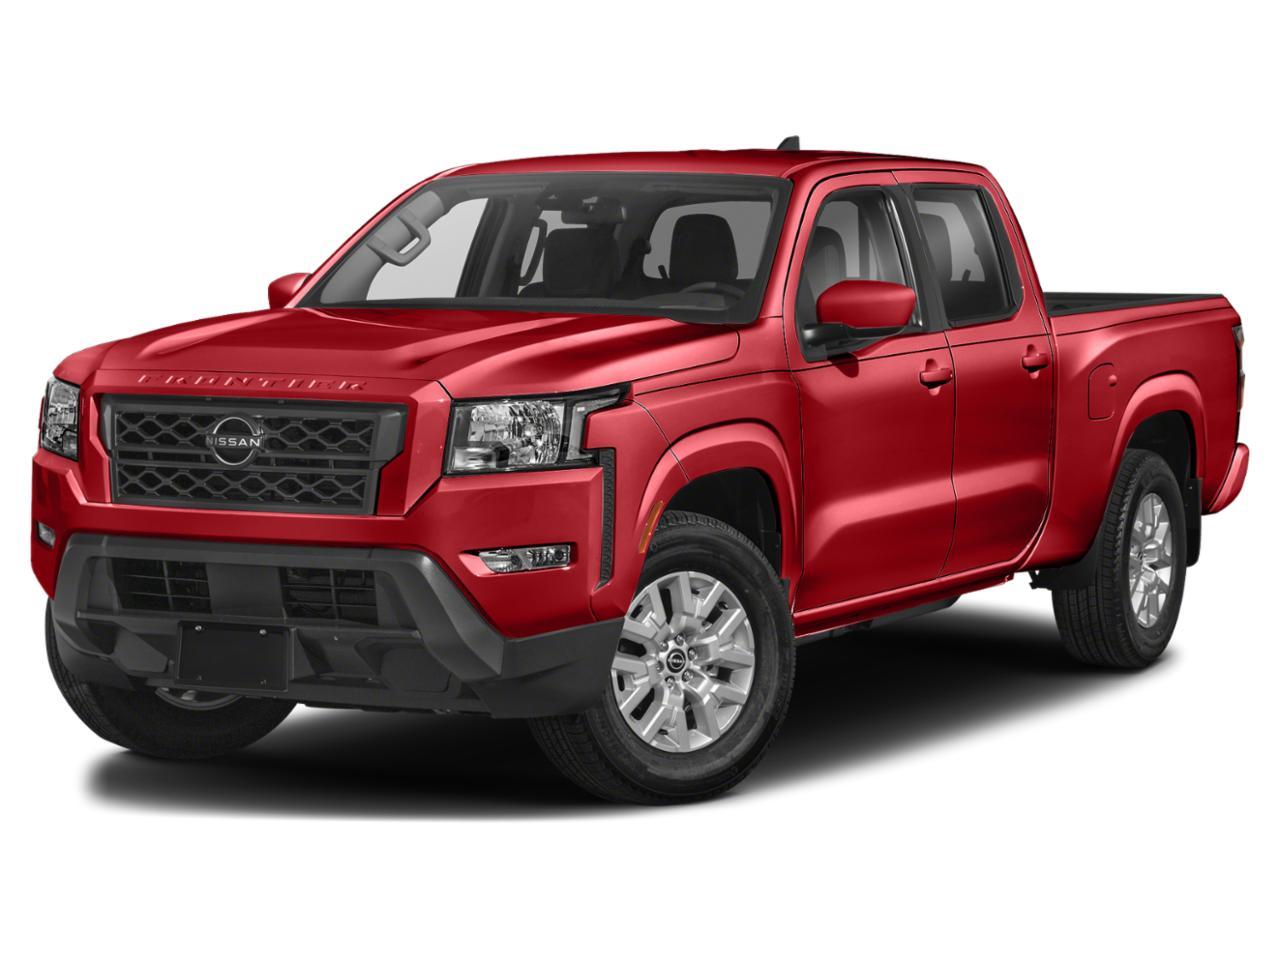 Certified Red 2022 Nissan Frontier Sale Columbus, Ohio | Ricart Used Car Factory